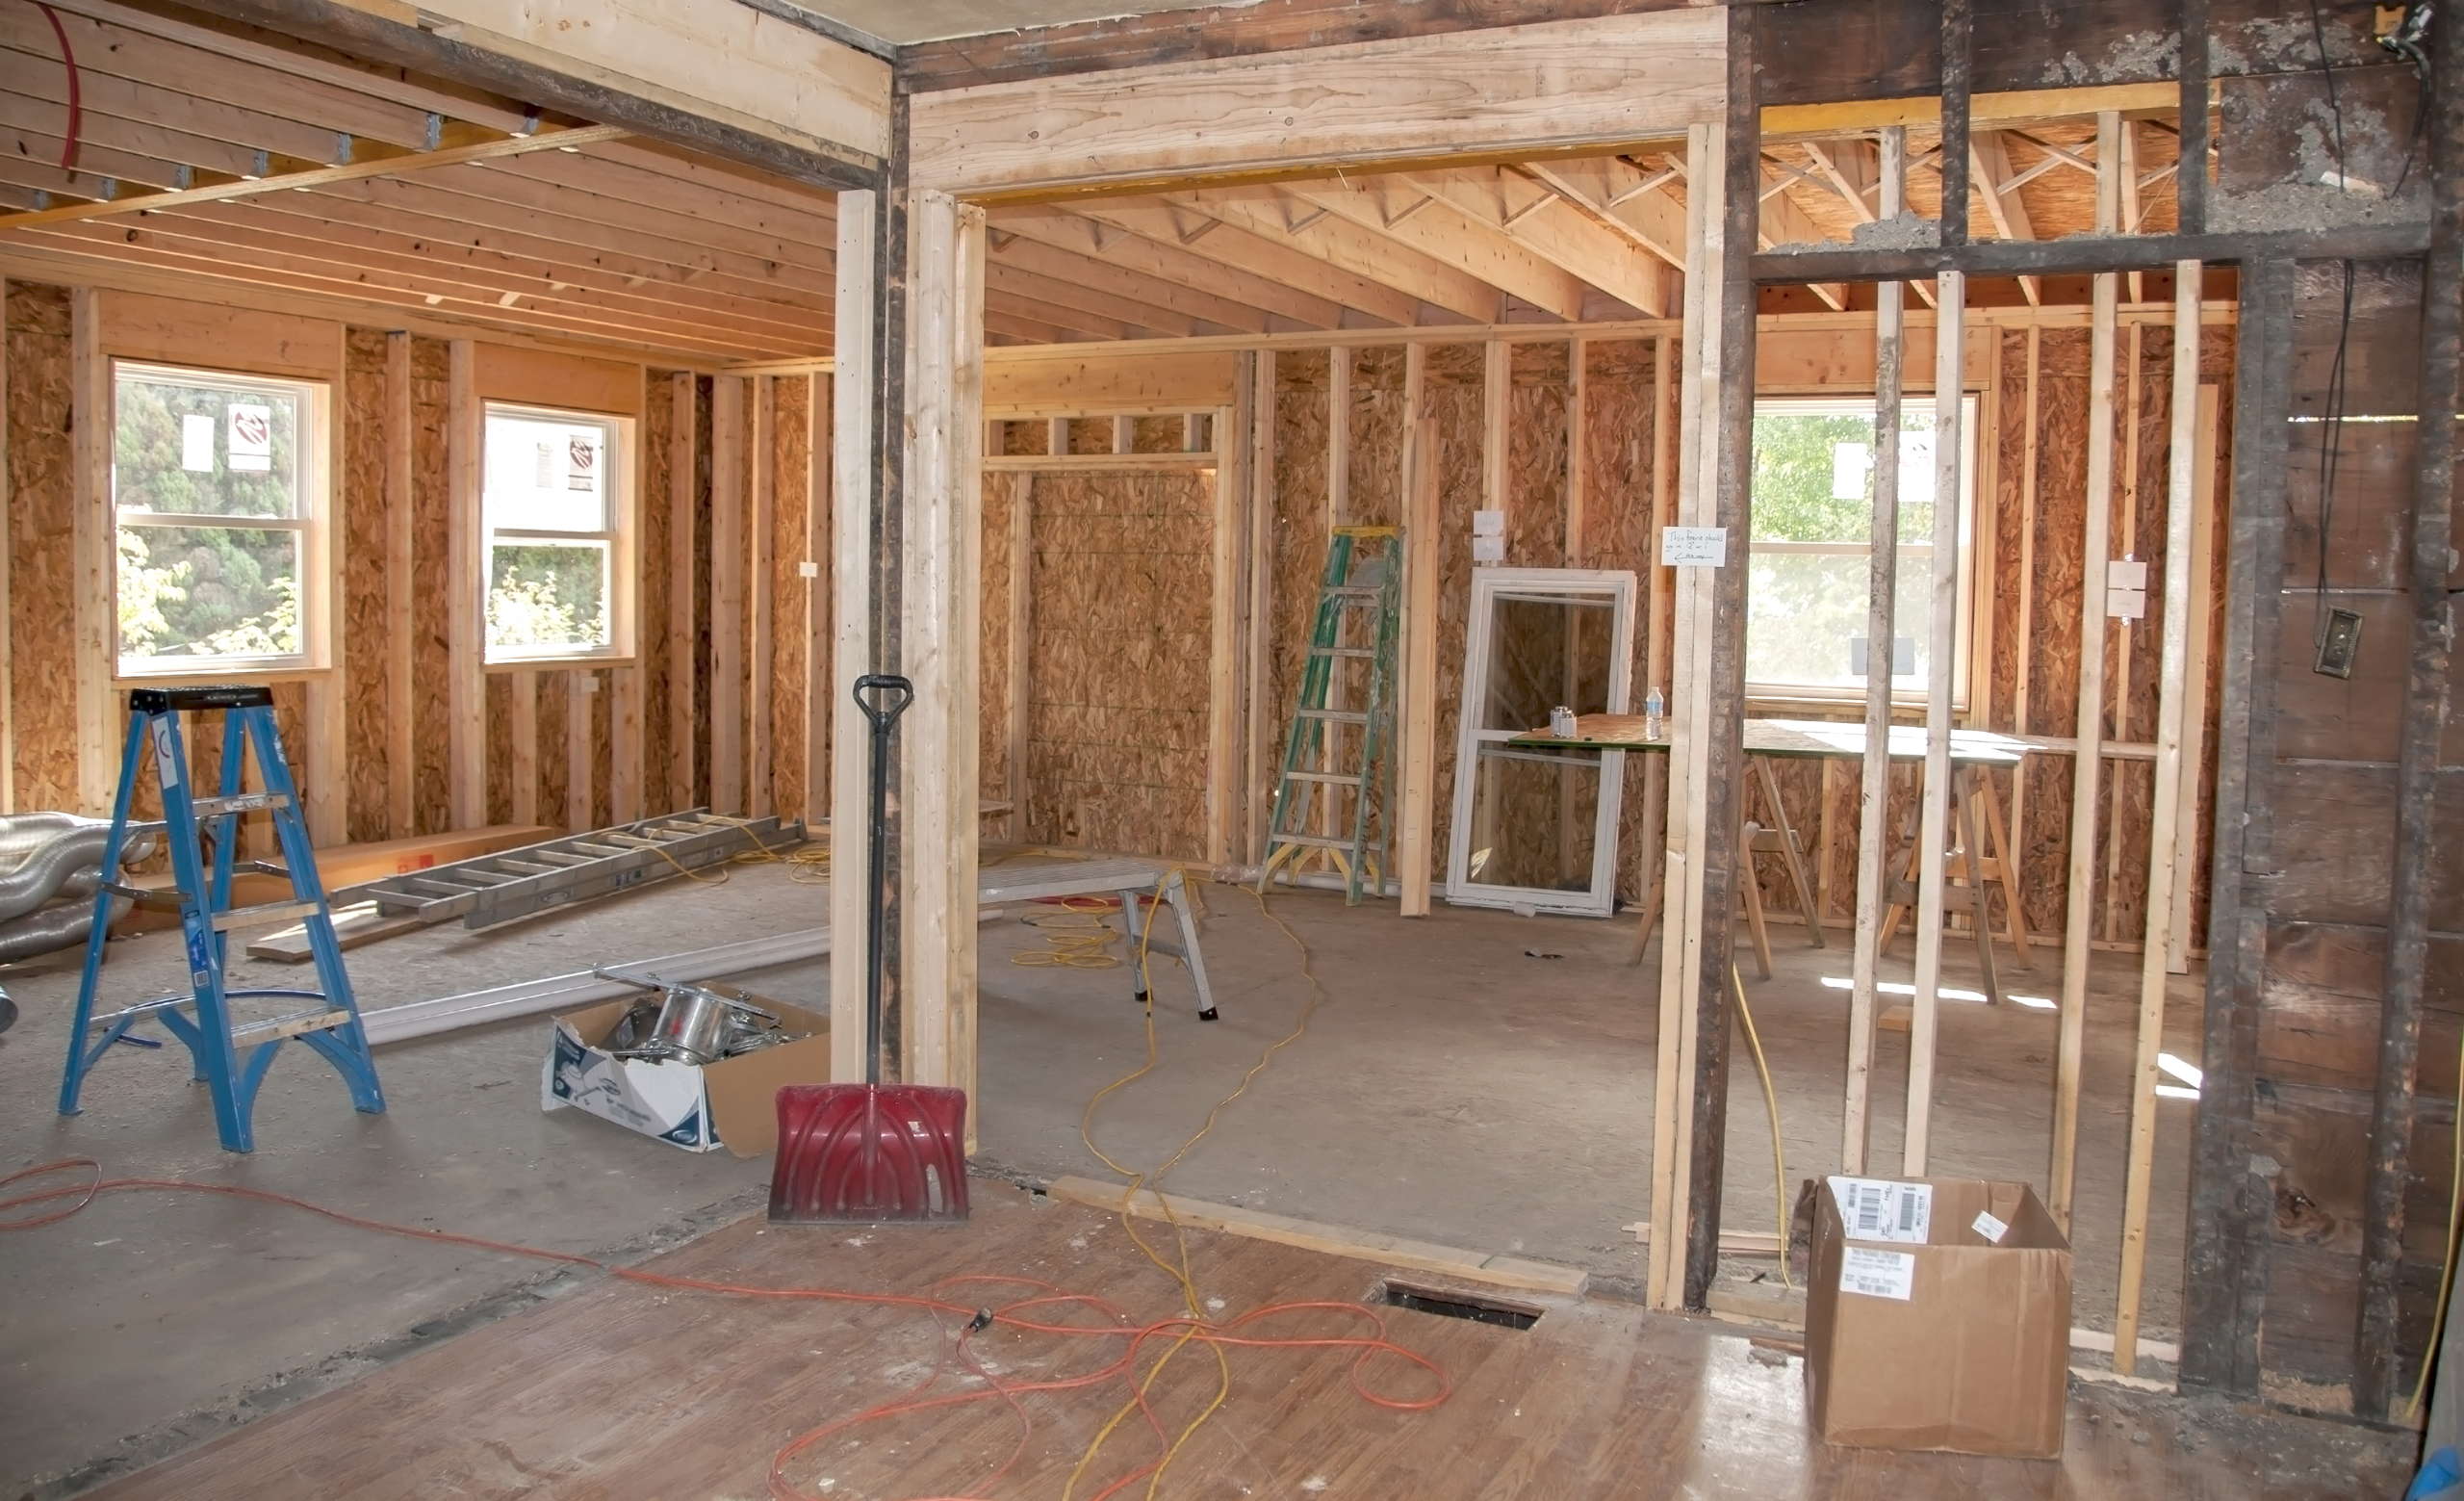 http://americanexpress-construction.com/wp-content/uploads/2015/04/roomaddition4.jpg